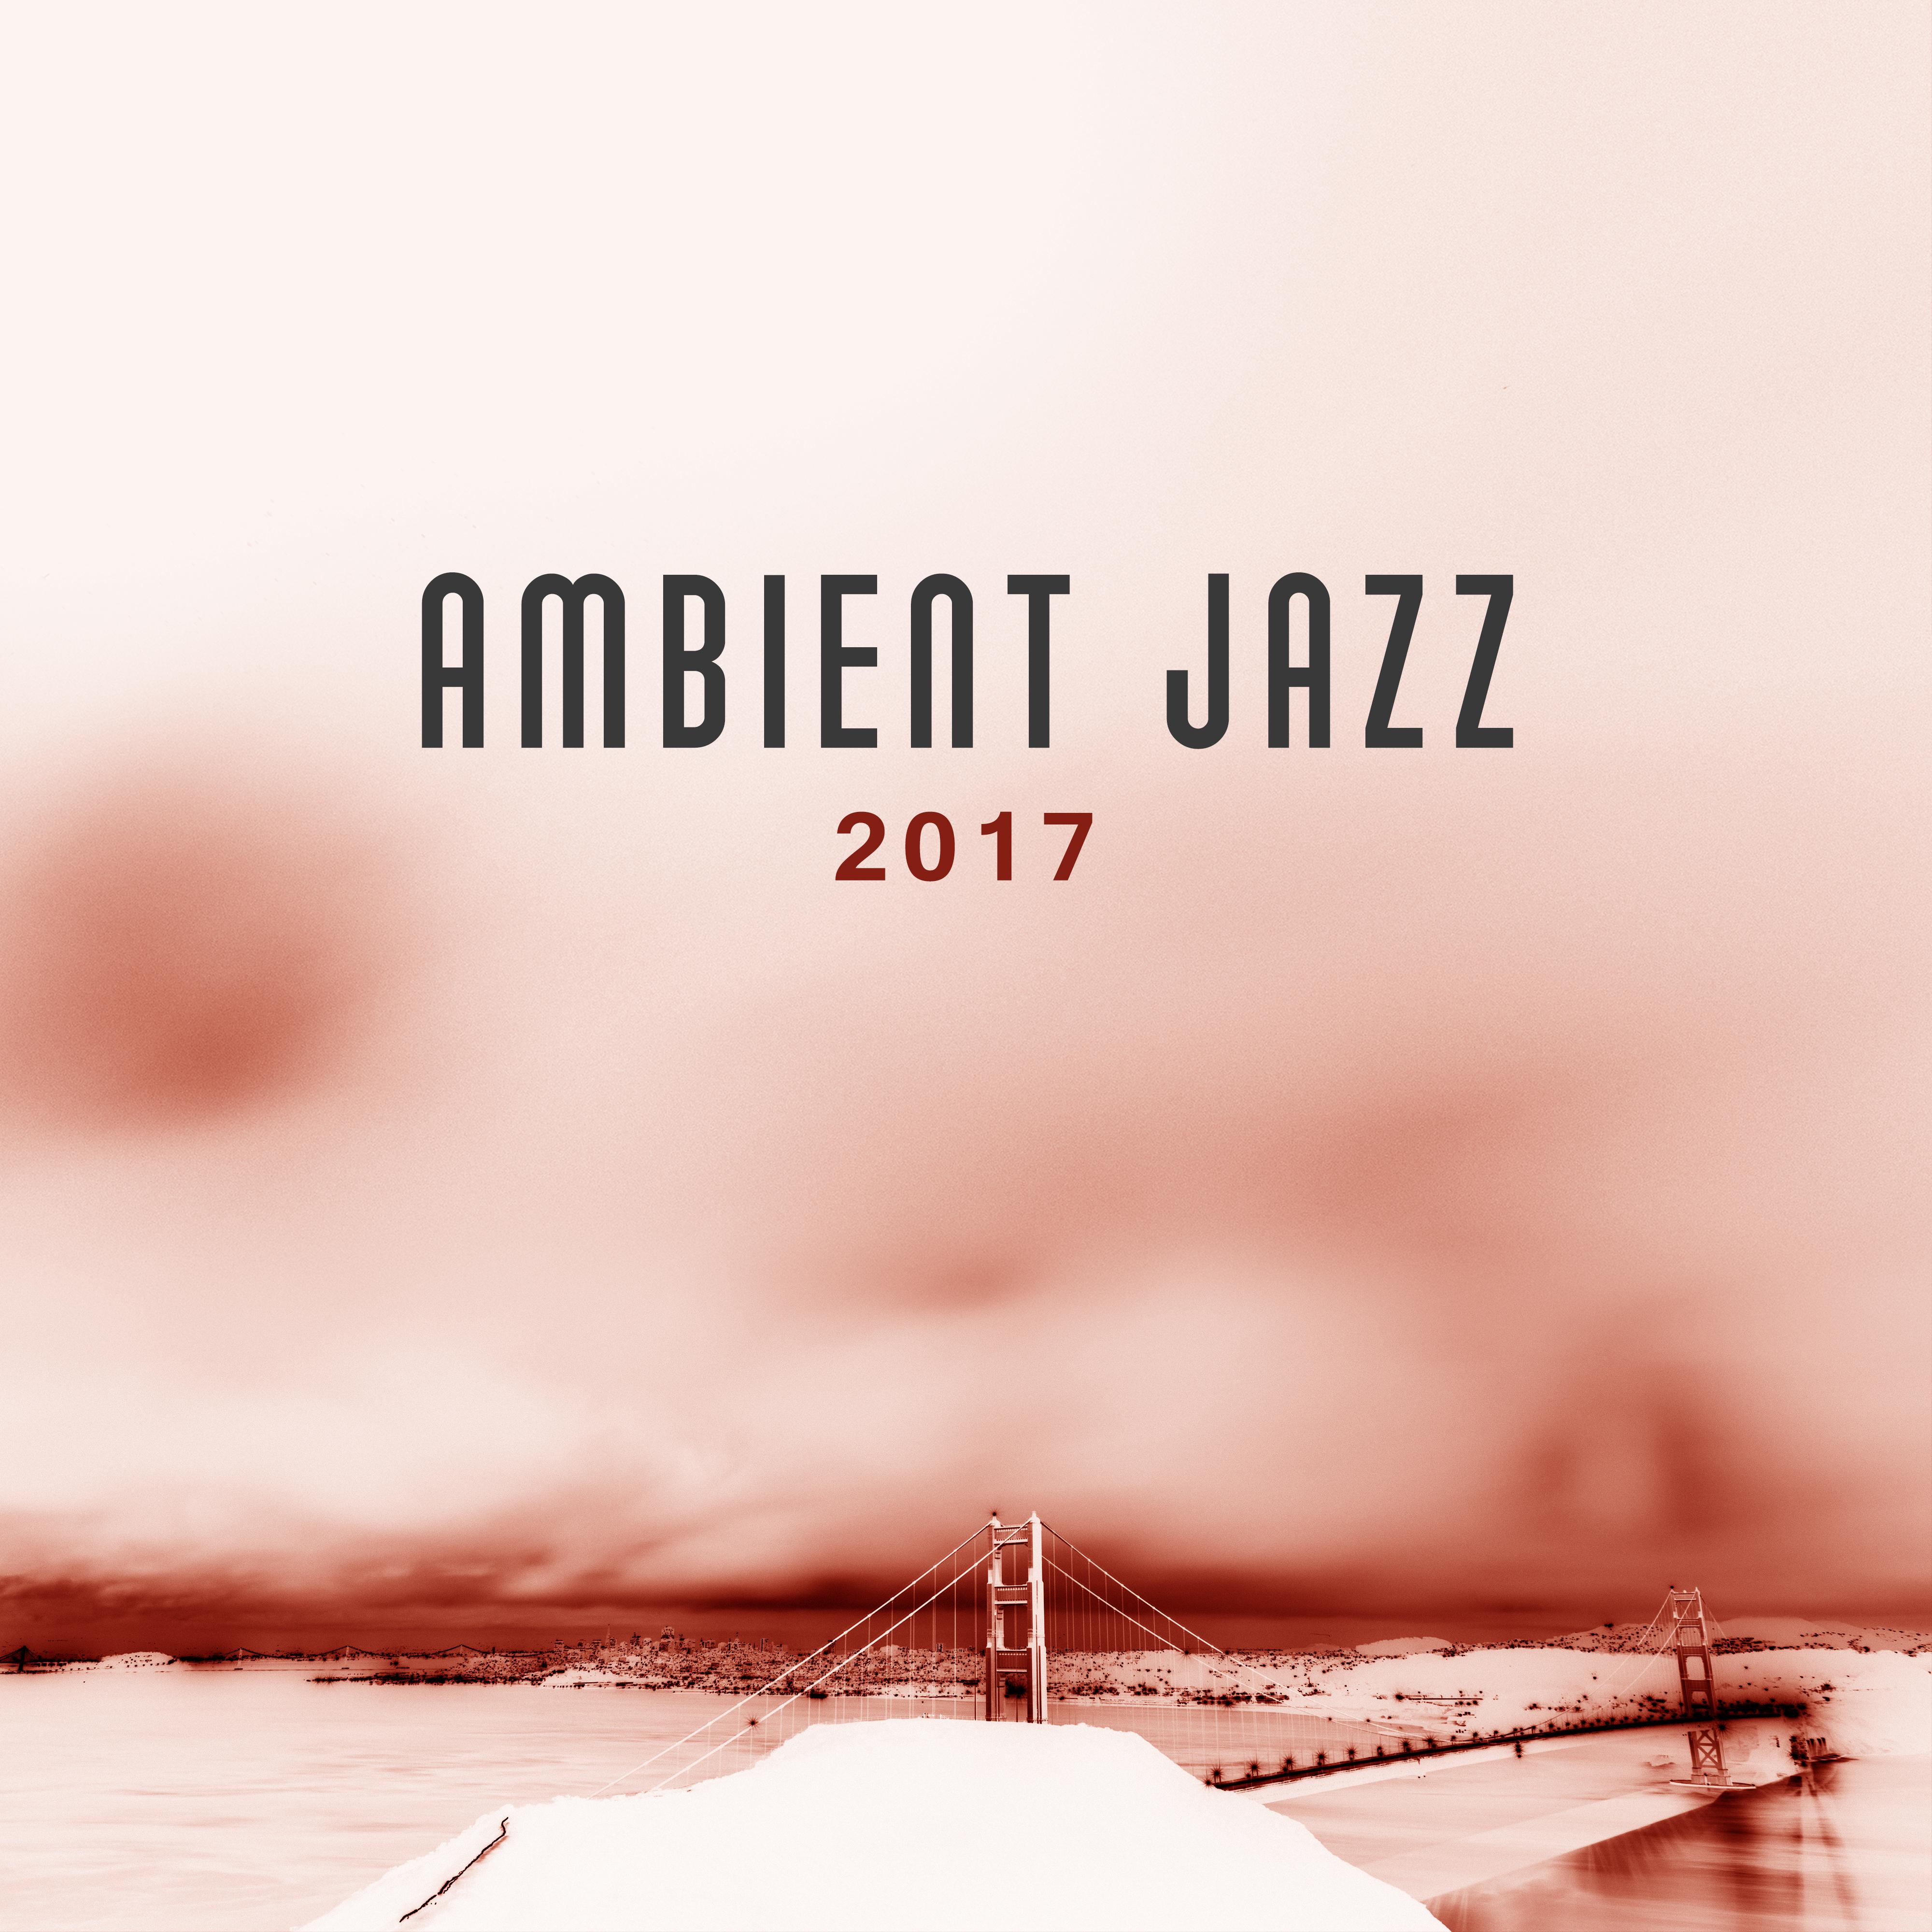 Ambient Jazz 2017  Smooth Jazz, Instrumental Music, Relaxed Piano